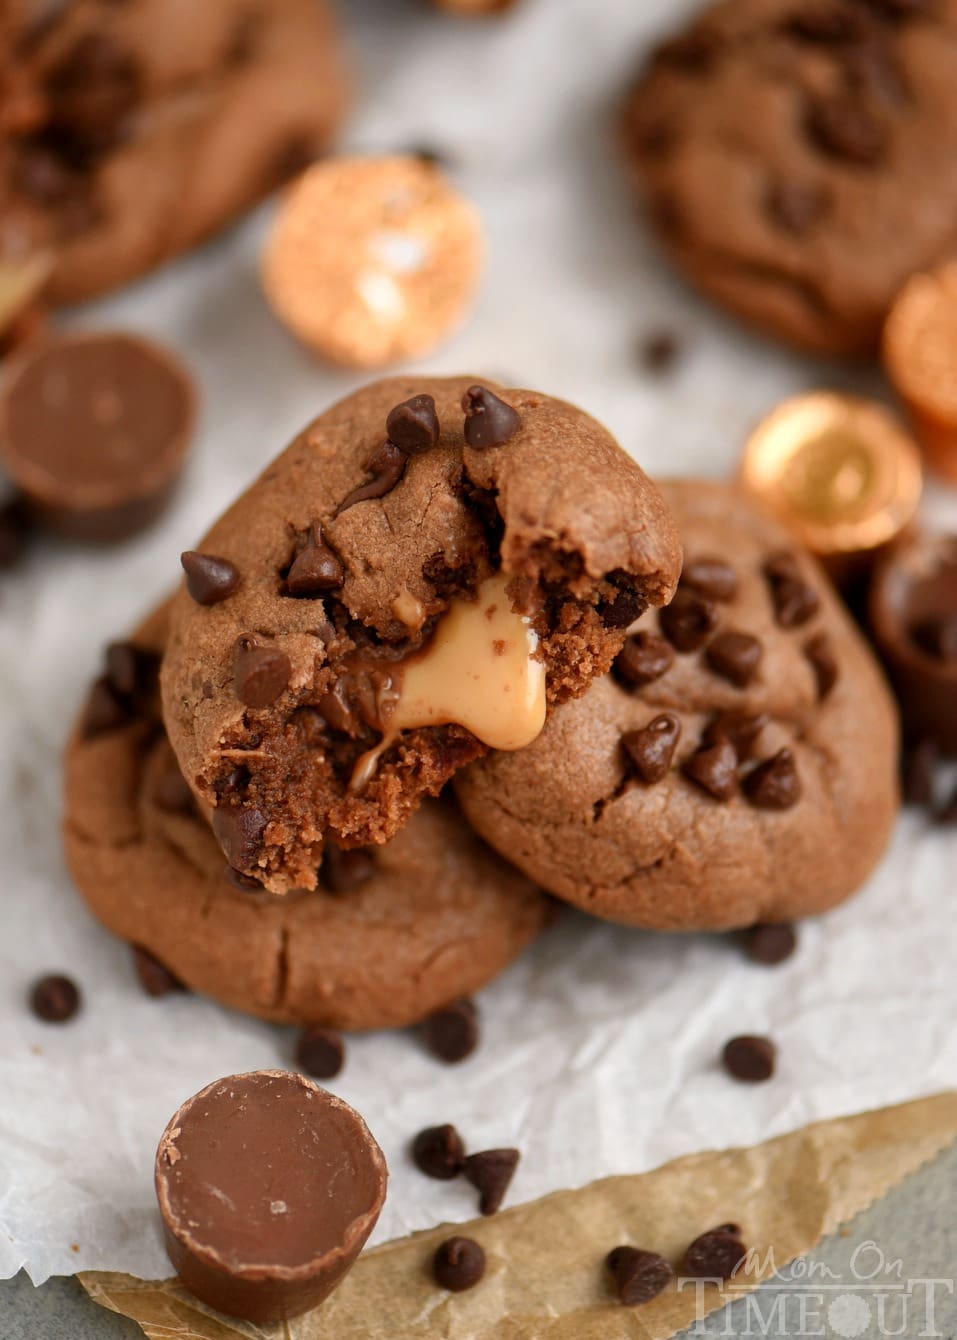 The ooey gooey centers of these Rolo Stuffed Chocolate Cake Mix Cookies will satisfy your deepest chocolate cravings! Hot from the oven, these easy cookies are impossible to resist!